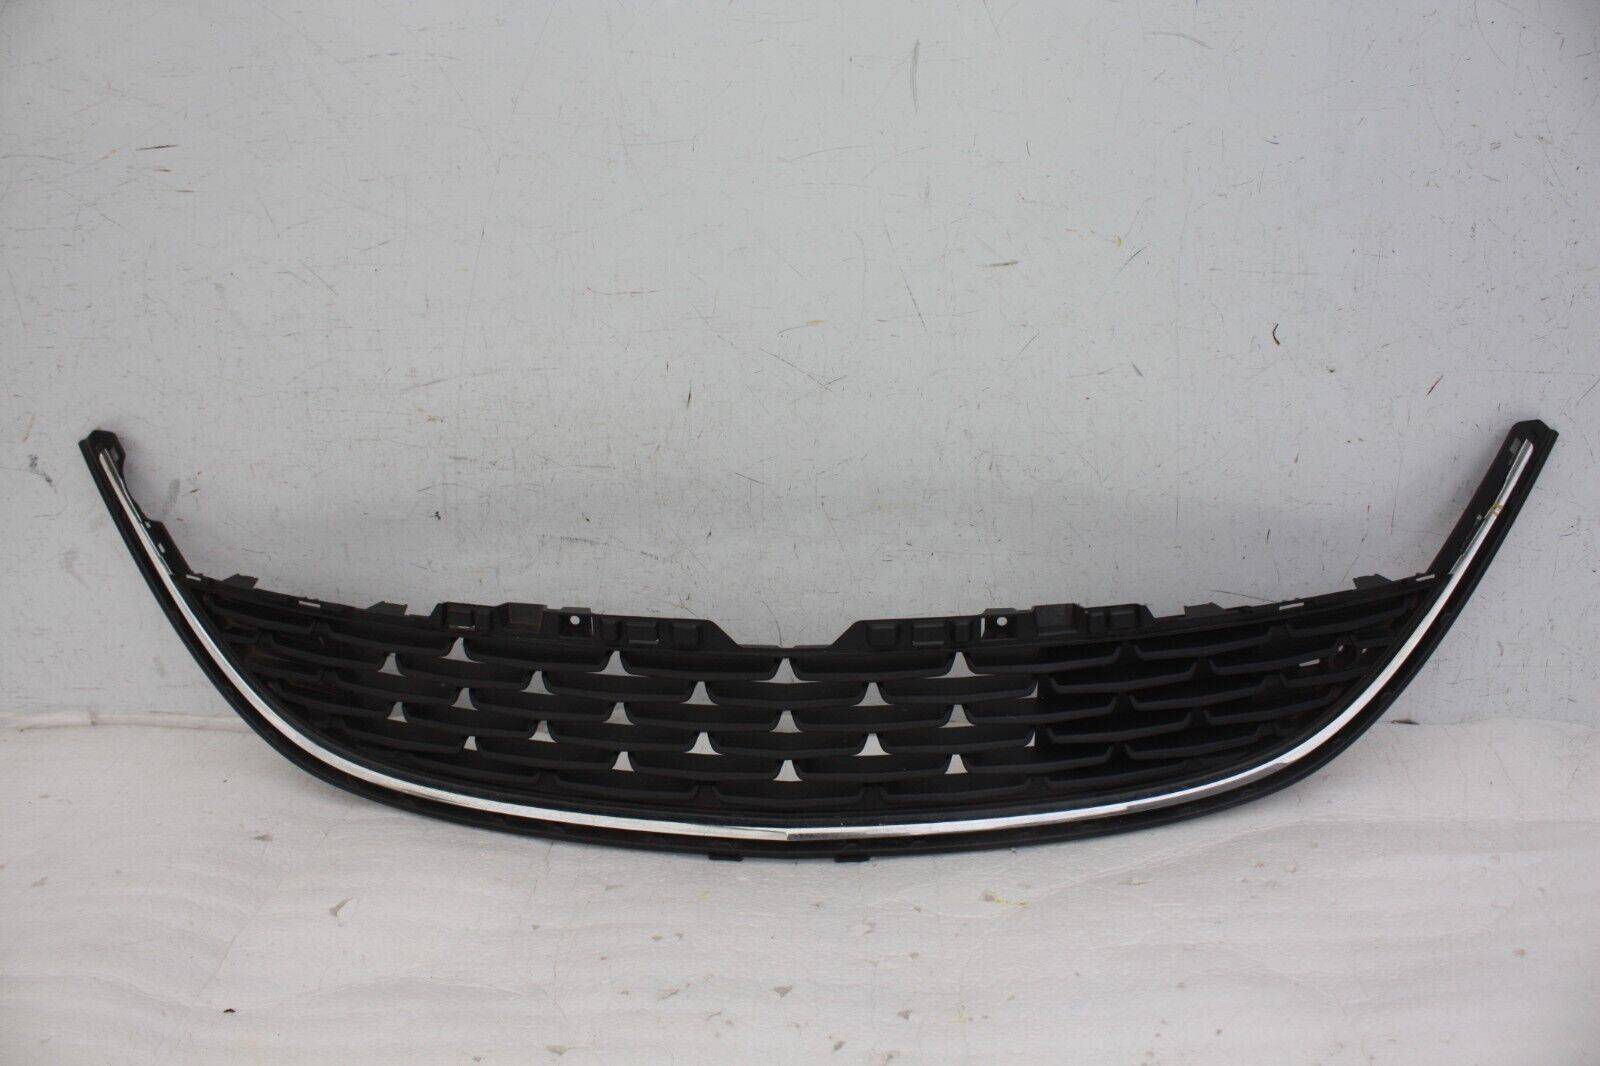 Vauxhall Astra Front Bumper Grill 13368822 Genuine DAMAGED 176424586508